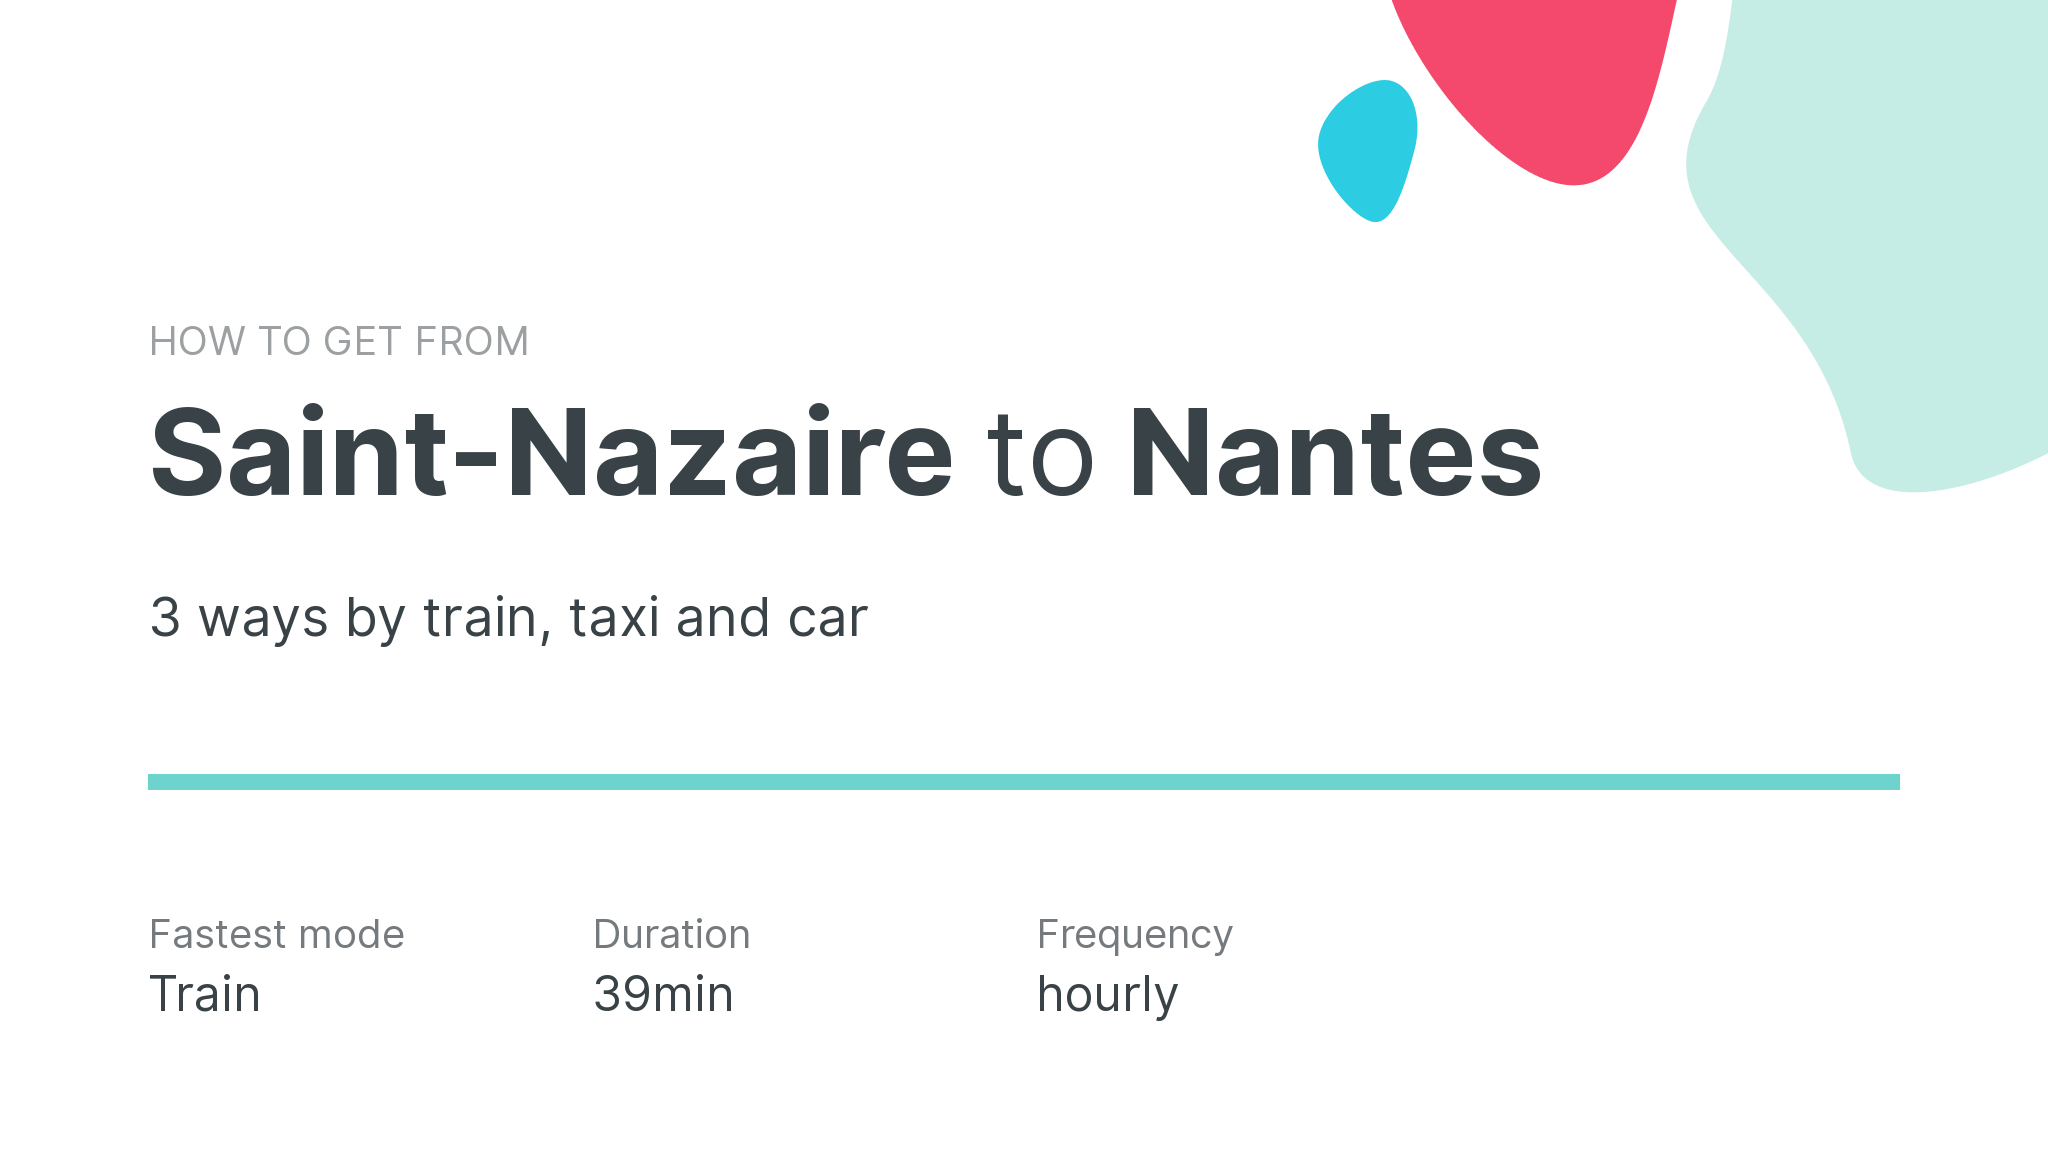 How do I get from Saint-Nazaire to Nantes